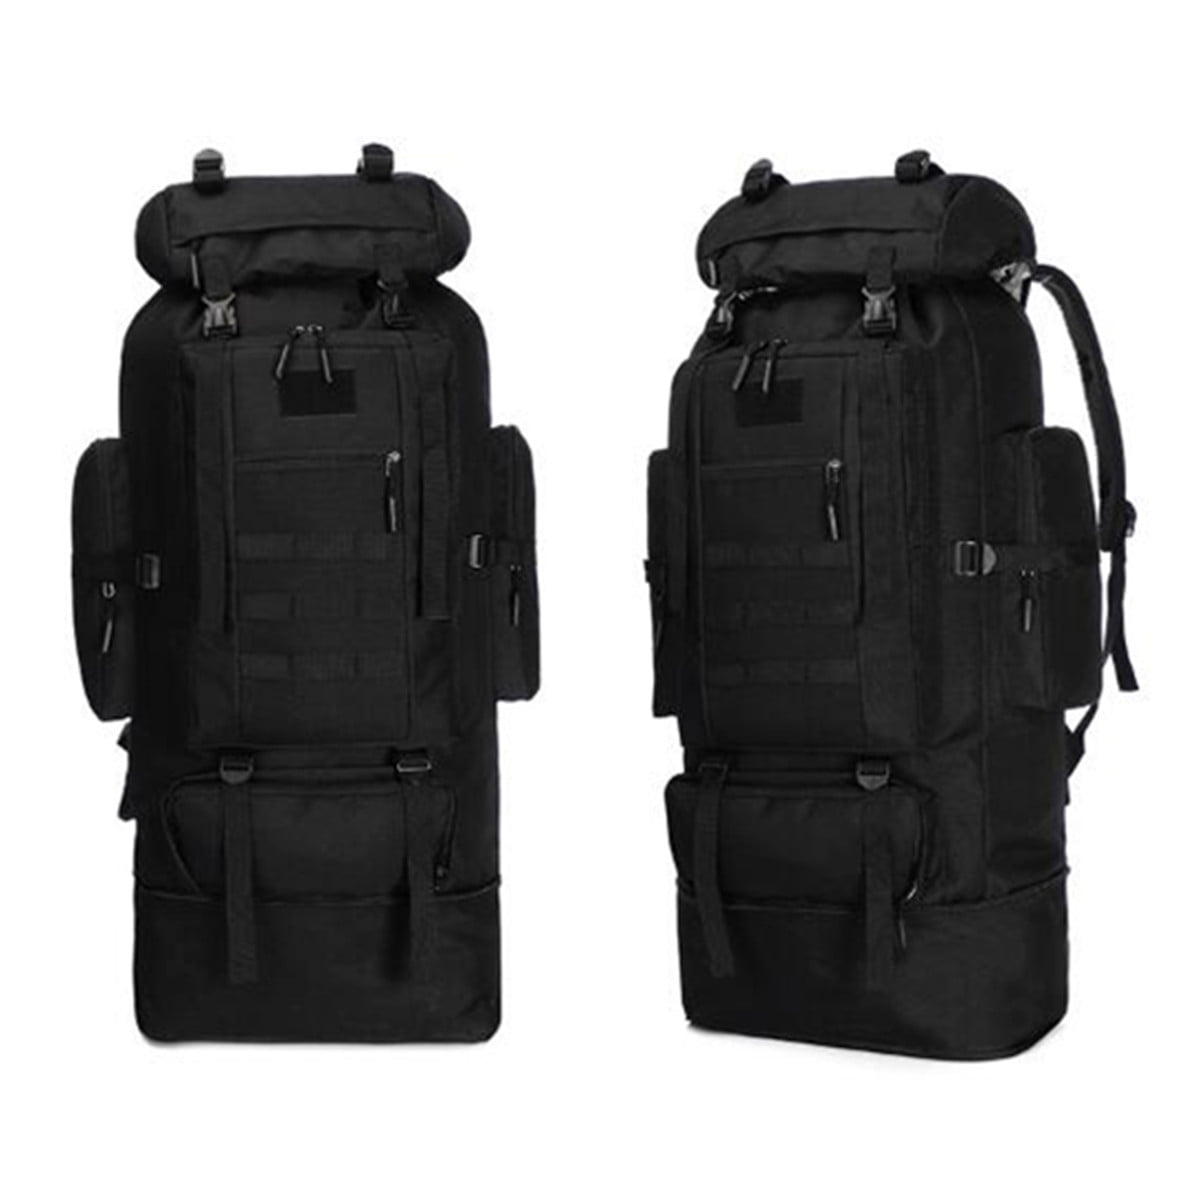 New Men's Military Backpack Camping Bags Tactical Large Army Hiking Travel Bags 